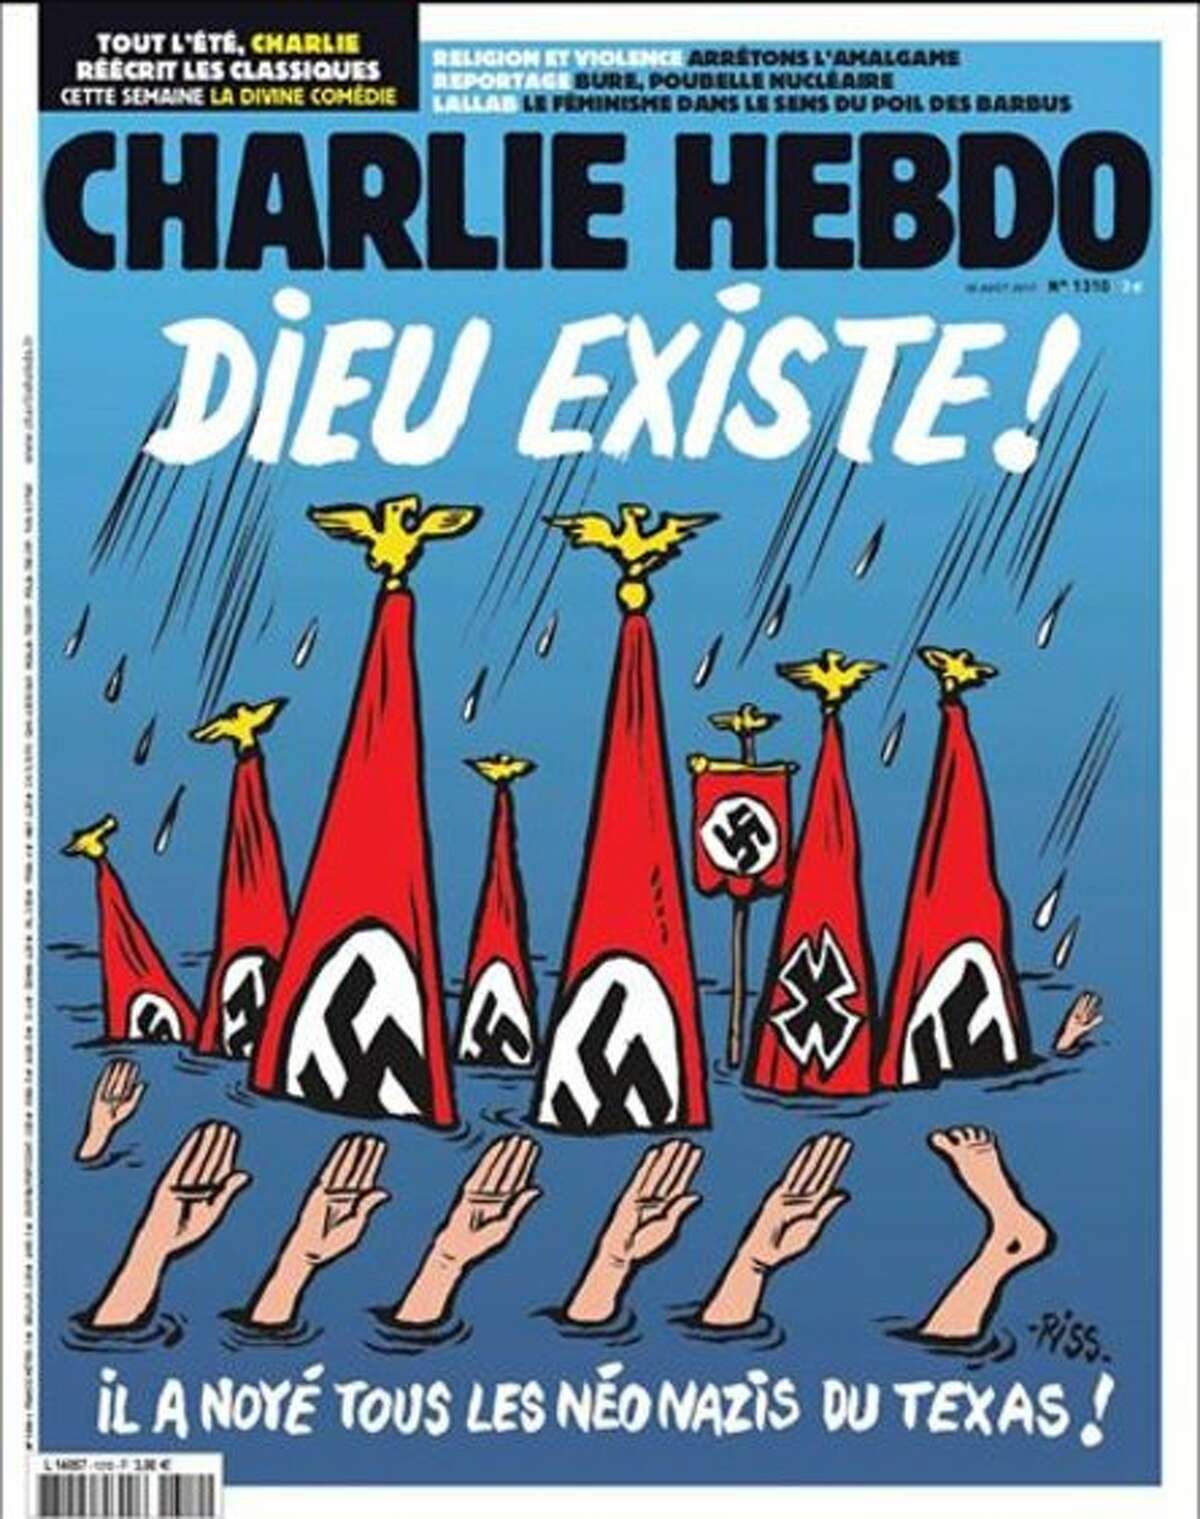 FILE- Thursday, satirical French magazine Charlie Hebdo drew strong condemnation for an illustrated cover that portrayed Hurricane Harvey victims in Texas as Nazis and racists. See how Twitter users reacted.